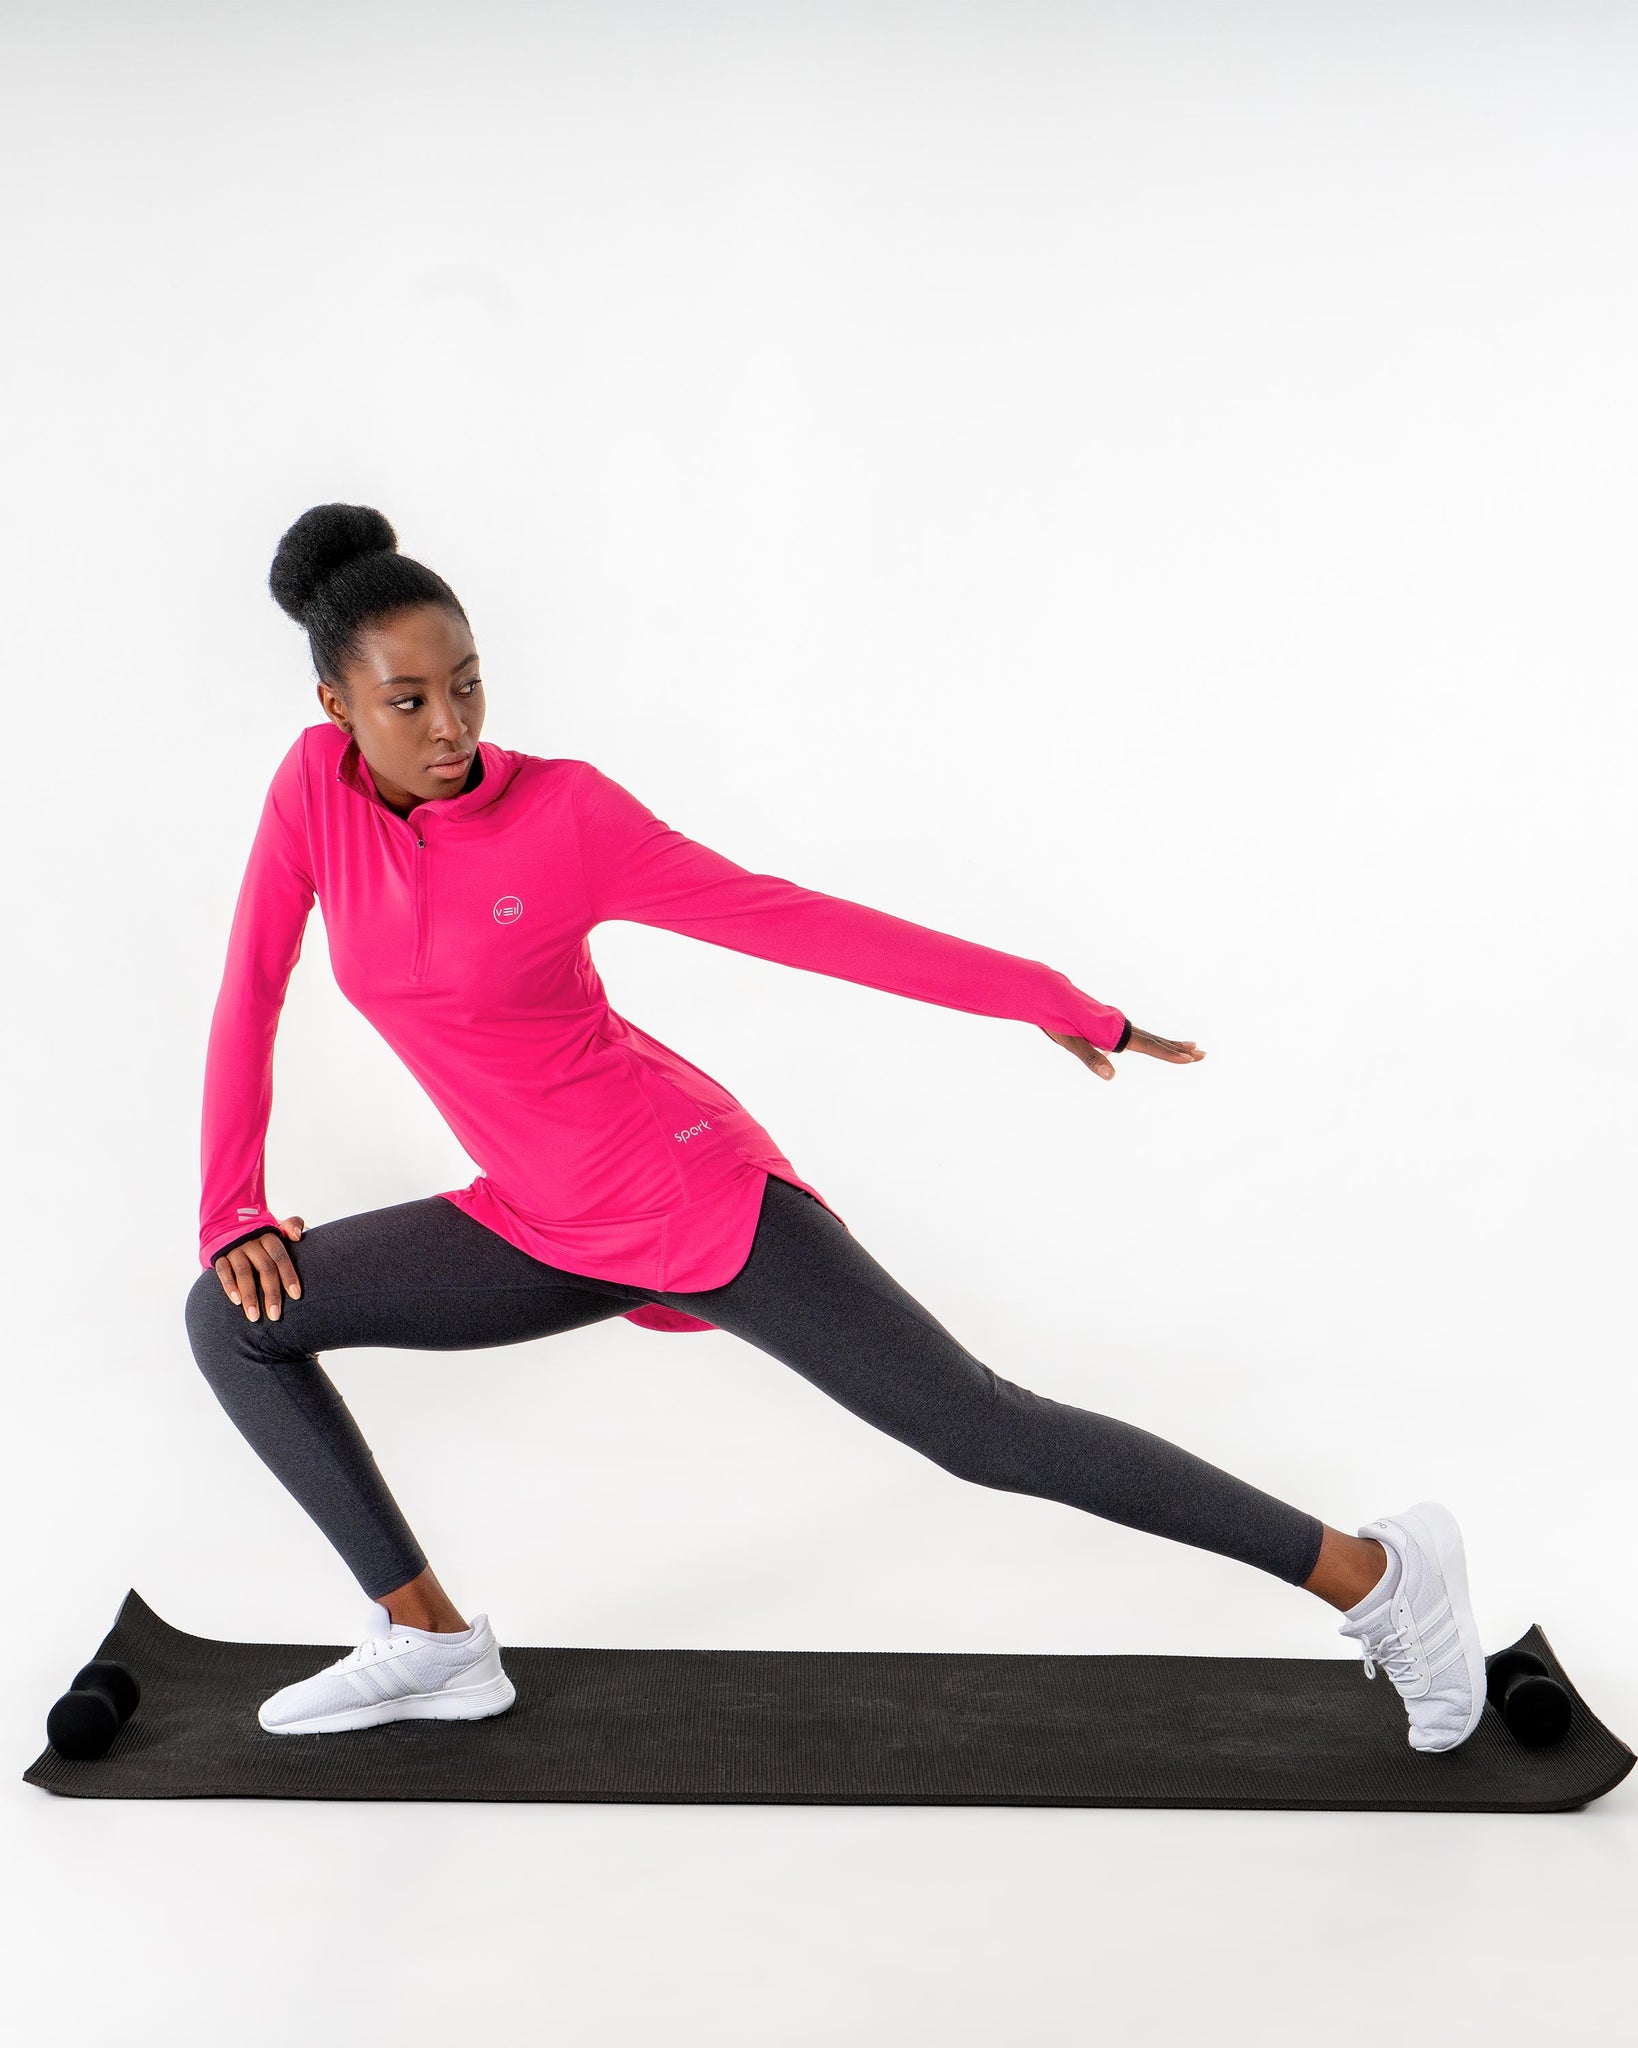 Spark Half-Zip in pink by Veil Garments. Modest activewear collection.